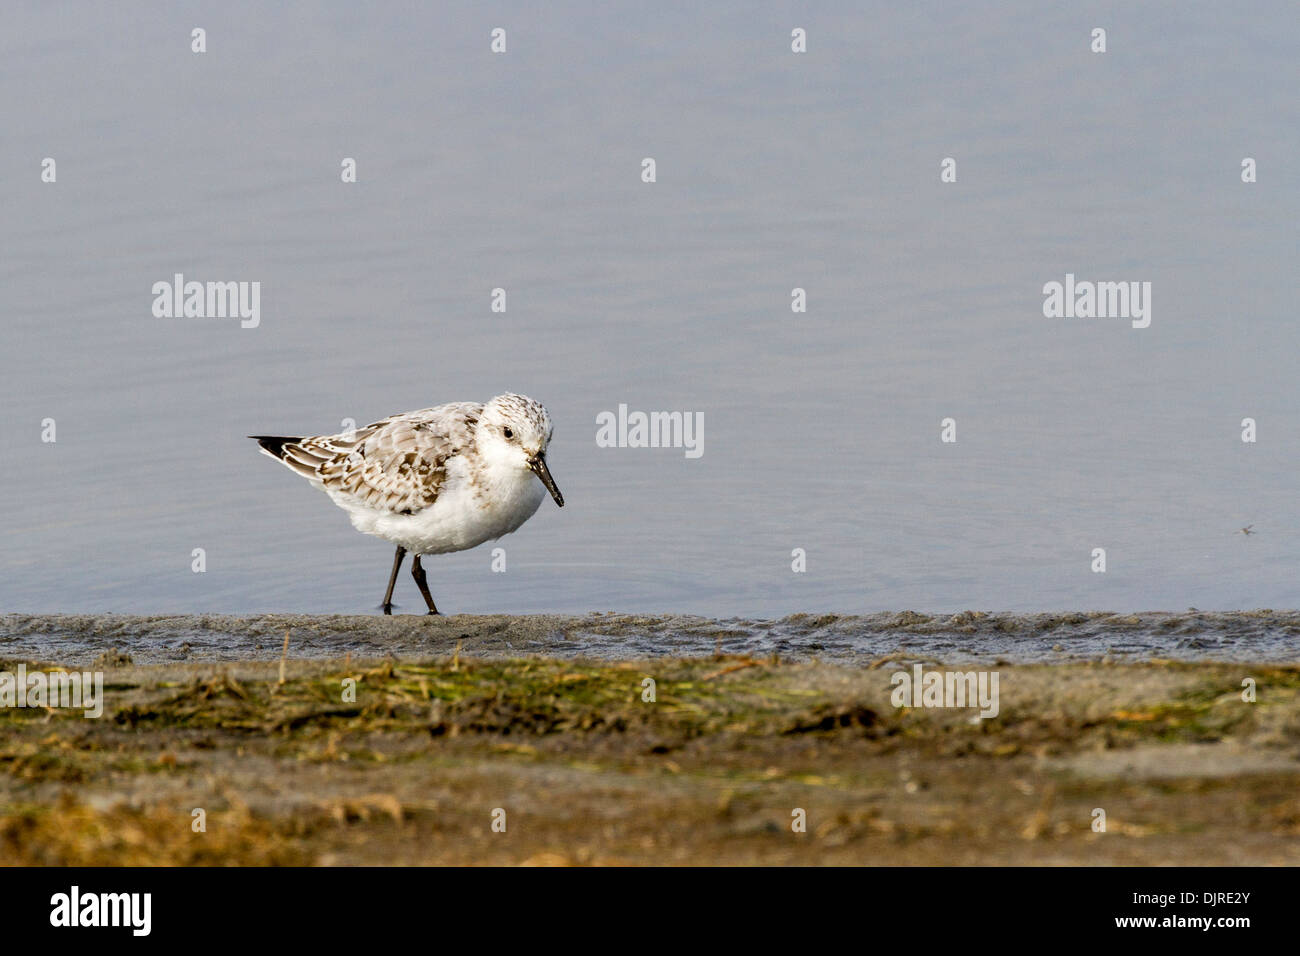 Sanderling sandpiper at Chincoteague National Wildlife Refuge on Assateague Island in Virginia. Stock Photo